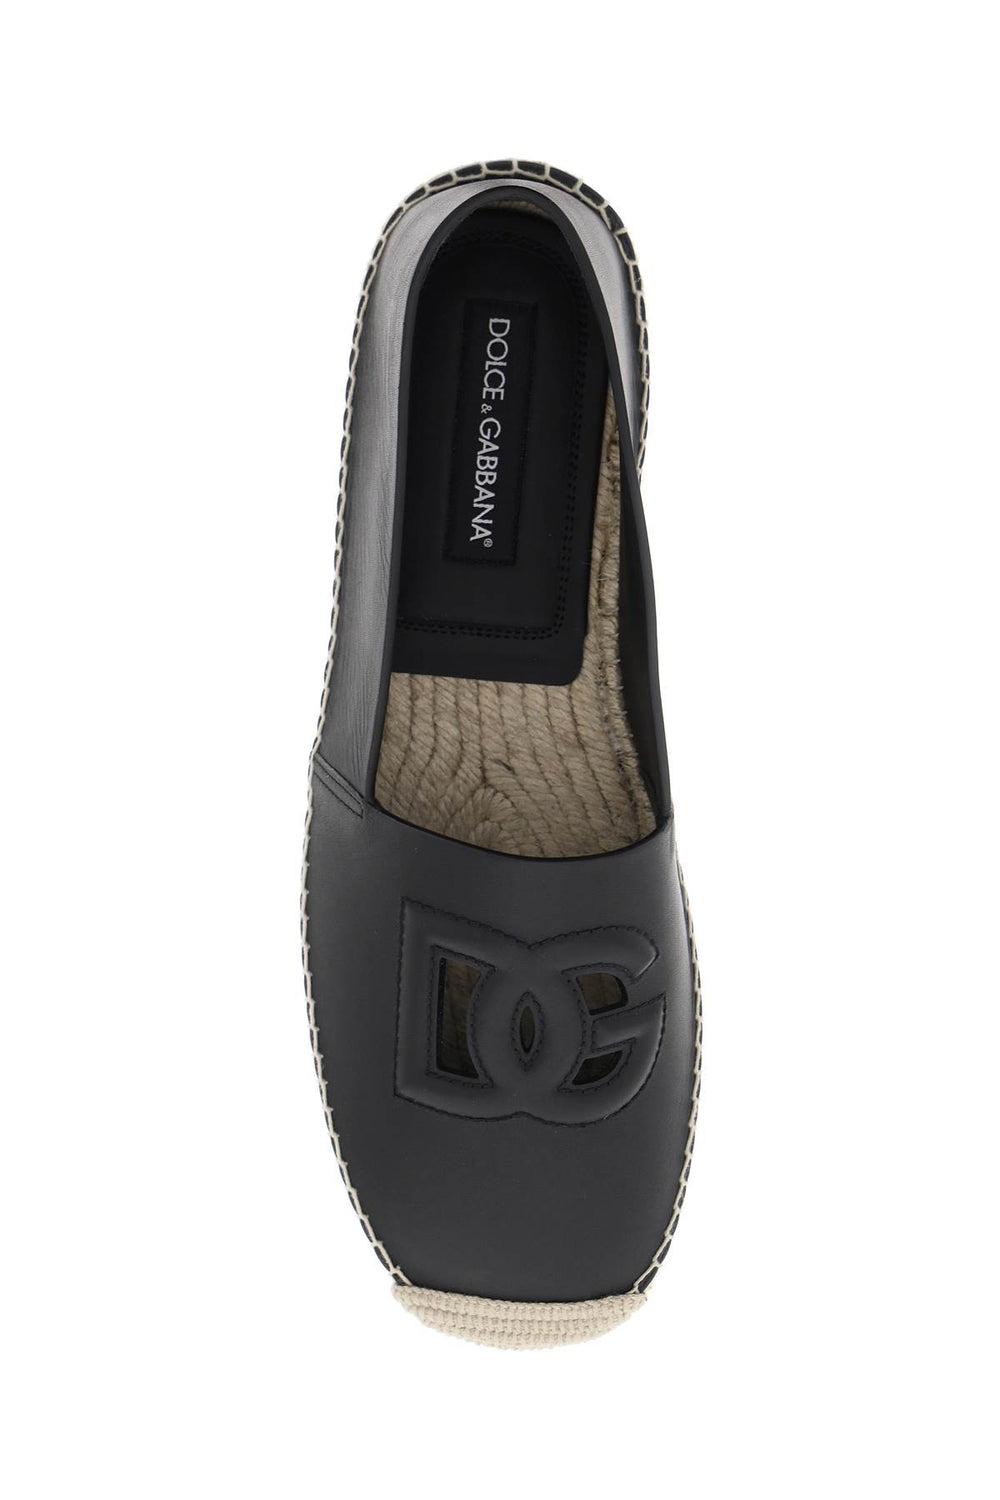 Dolce & gabbana leather espadrilles with dg logo and-1